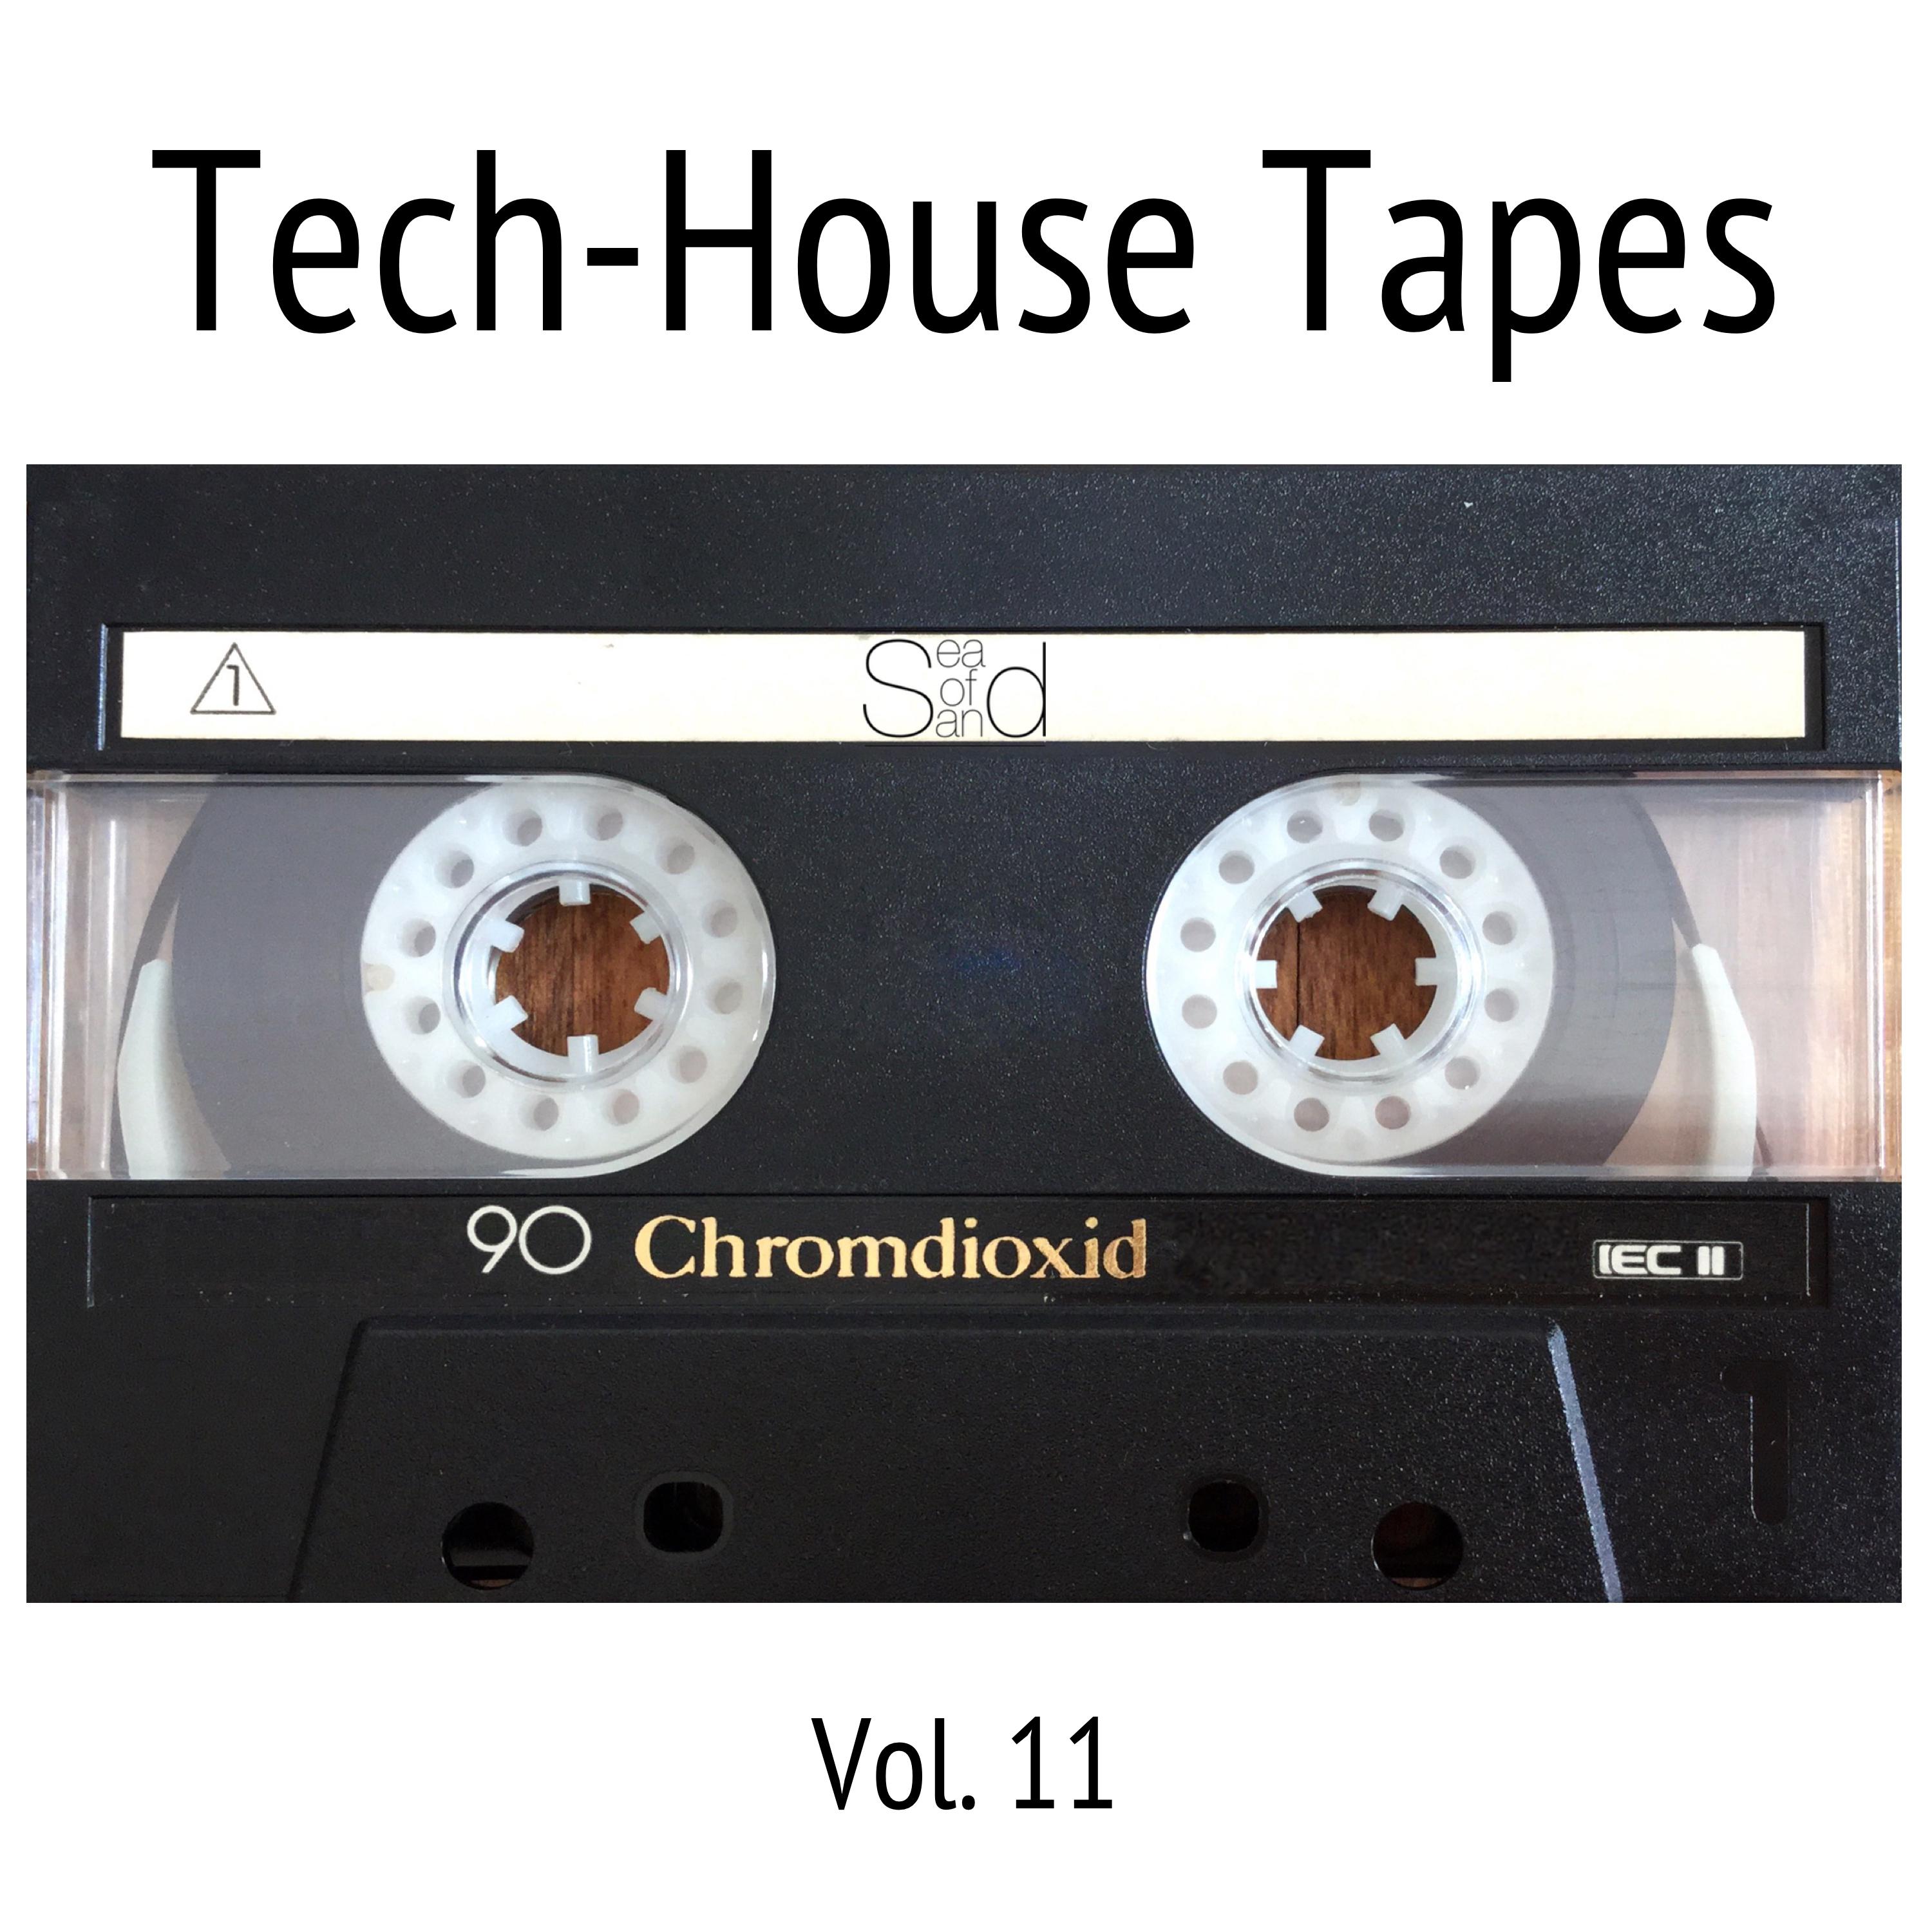 Tech-House Tapes, Vol. 11